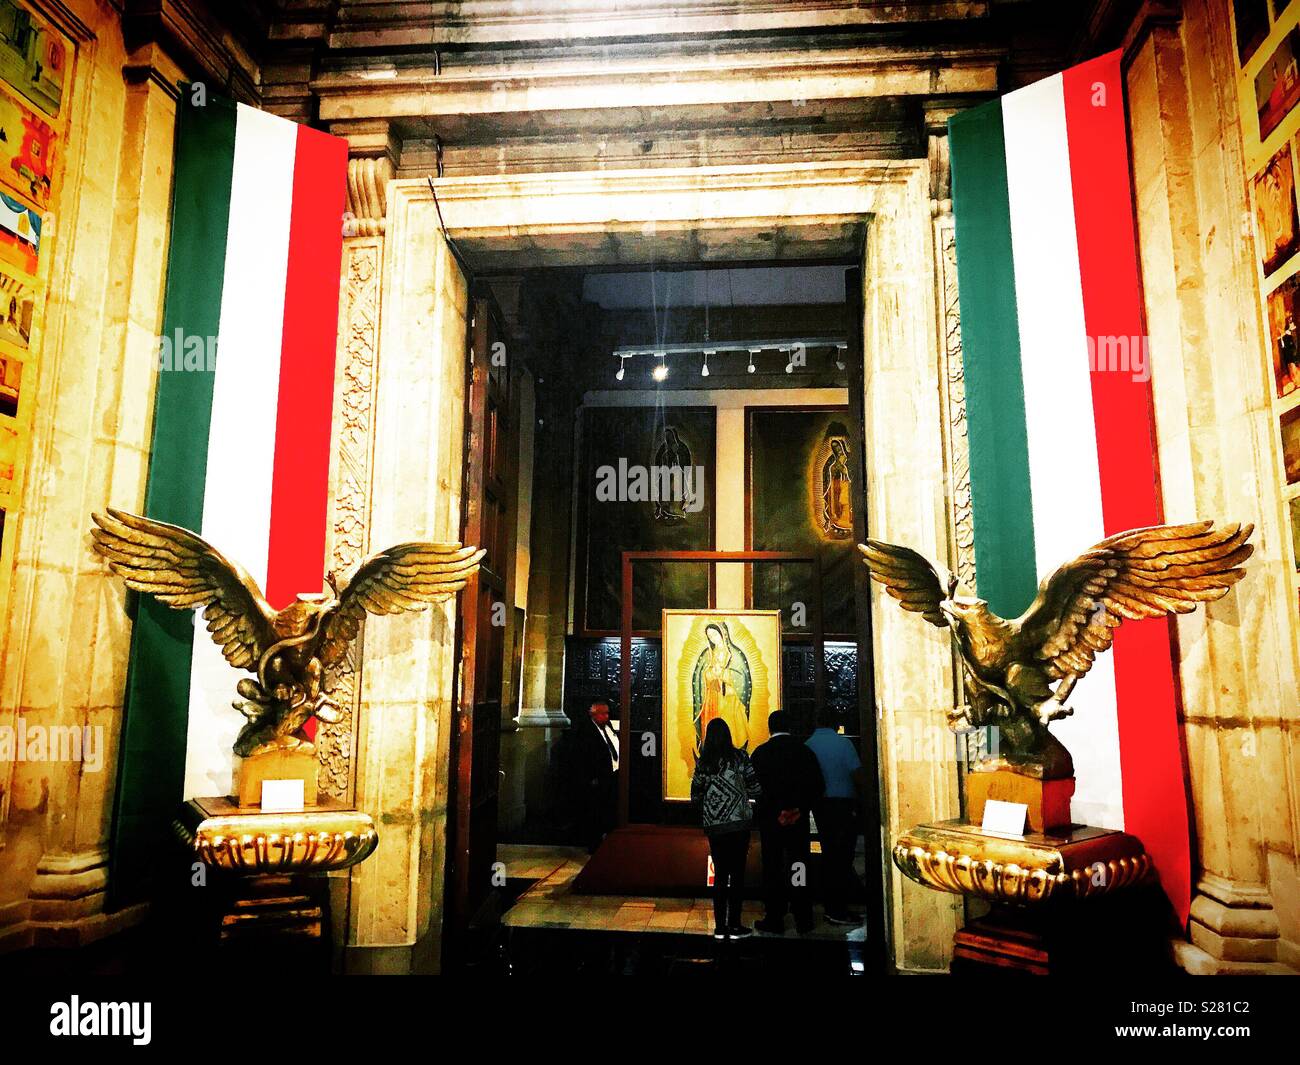 Two Mexican flags and two sculptures of golden eagles devouring a serpent decorate a door in the museum of the Our Lady of Guadalupe Basilica in Mexico City, Mexico Stock Photo